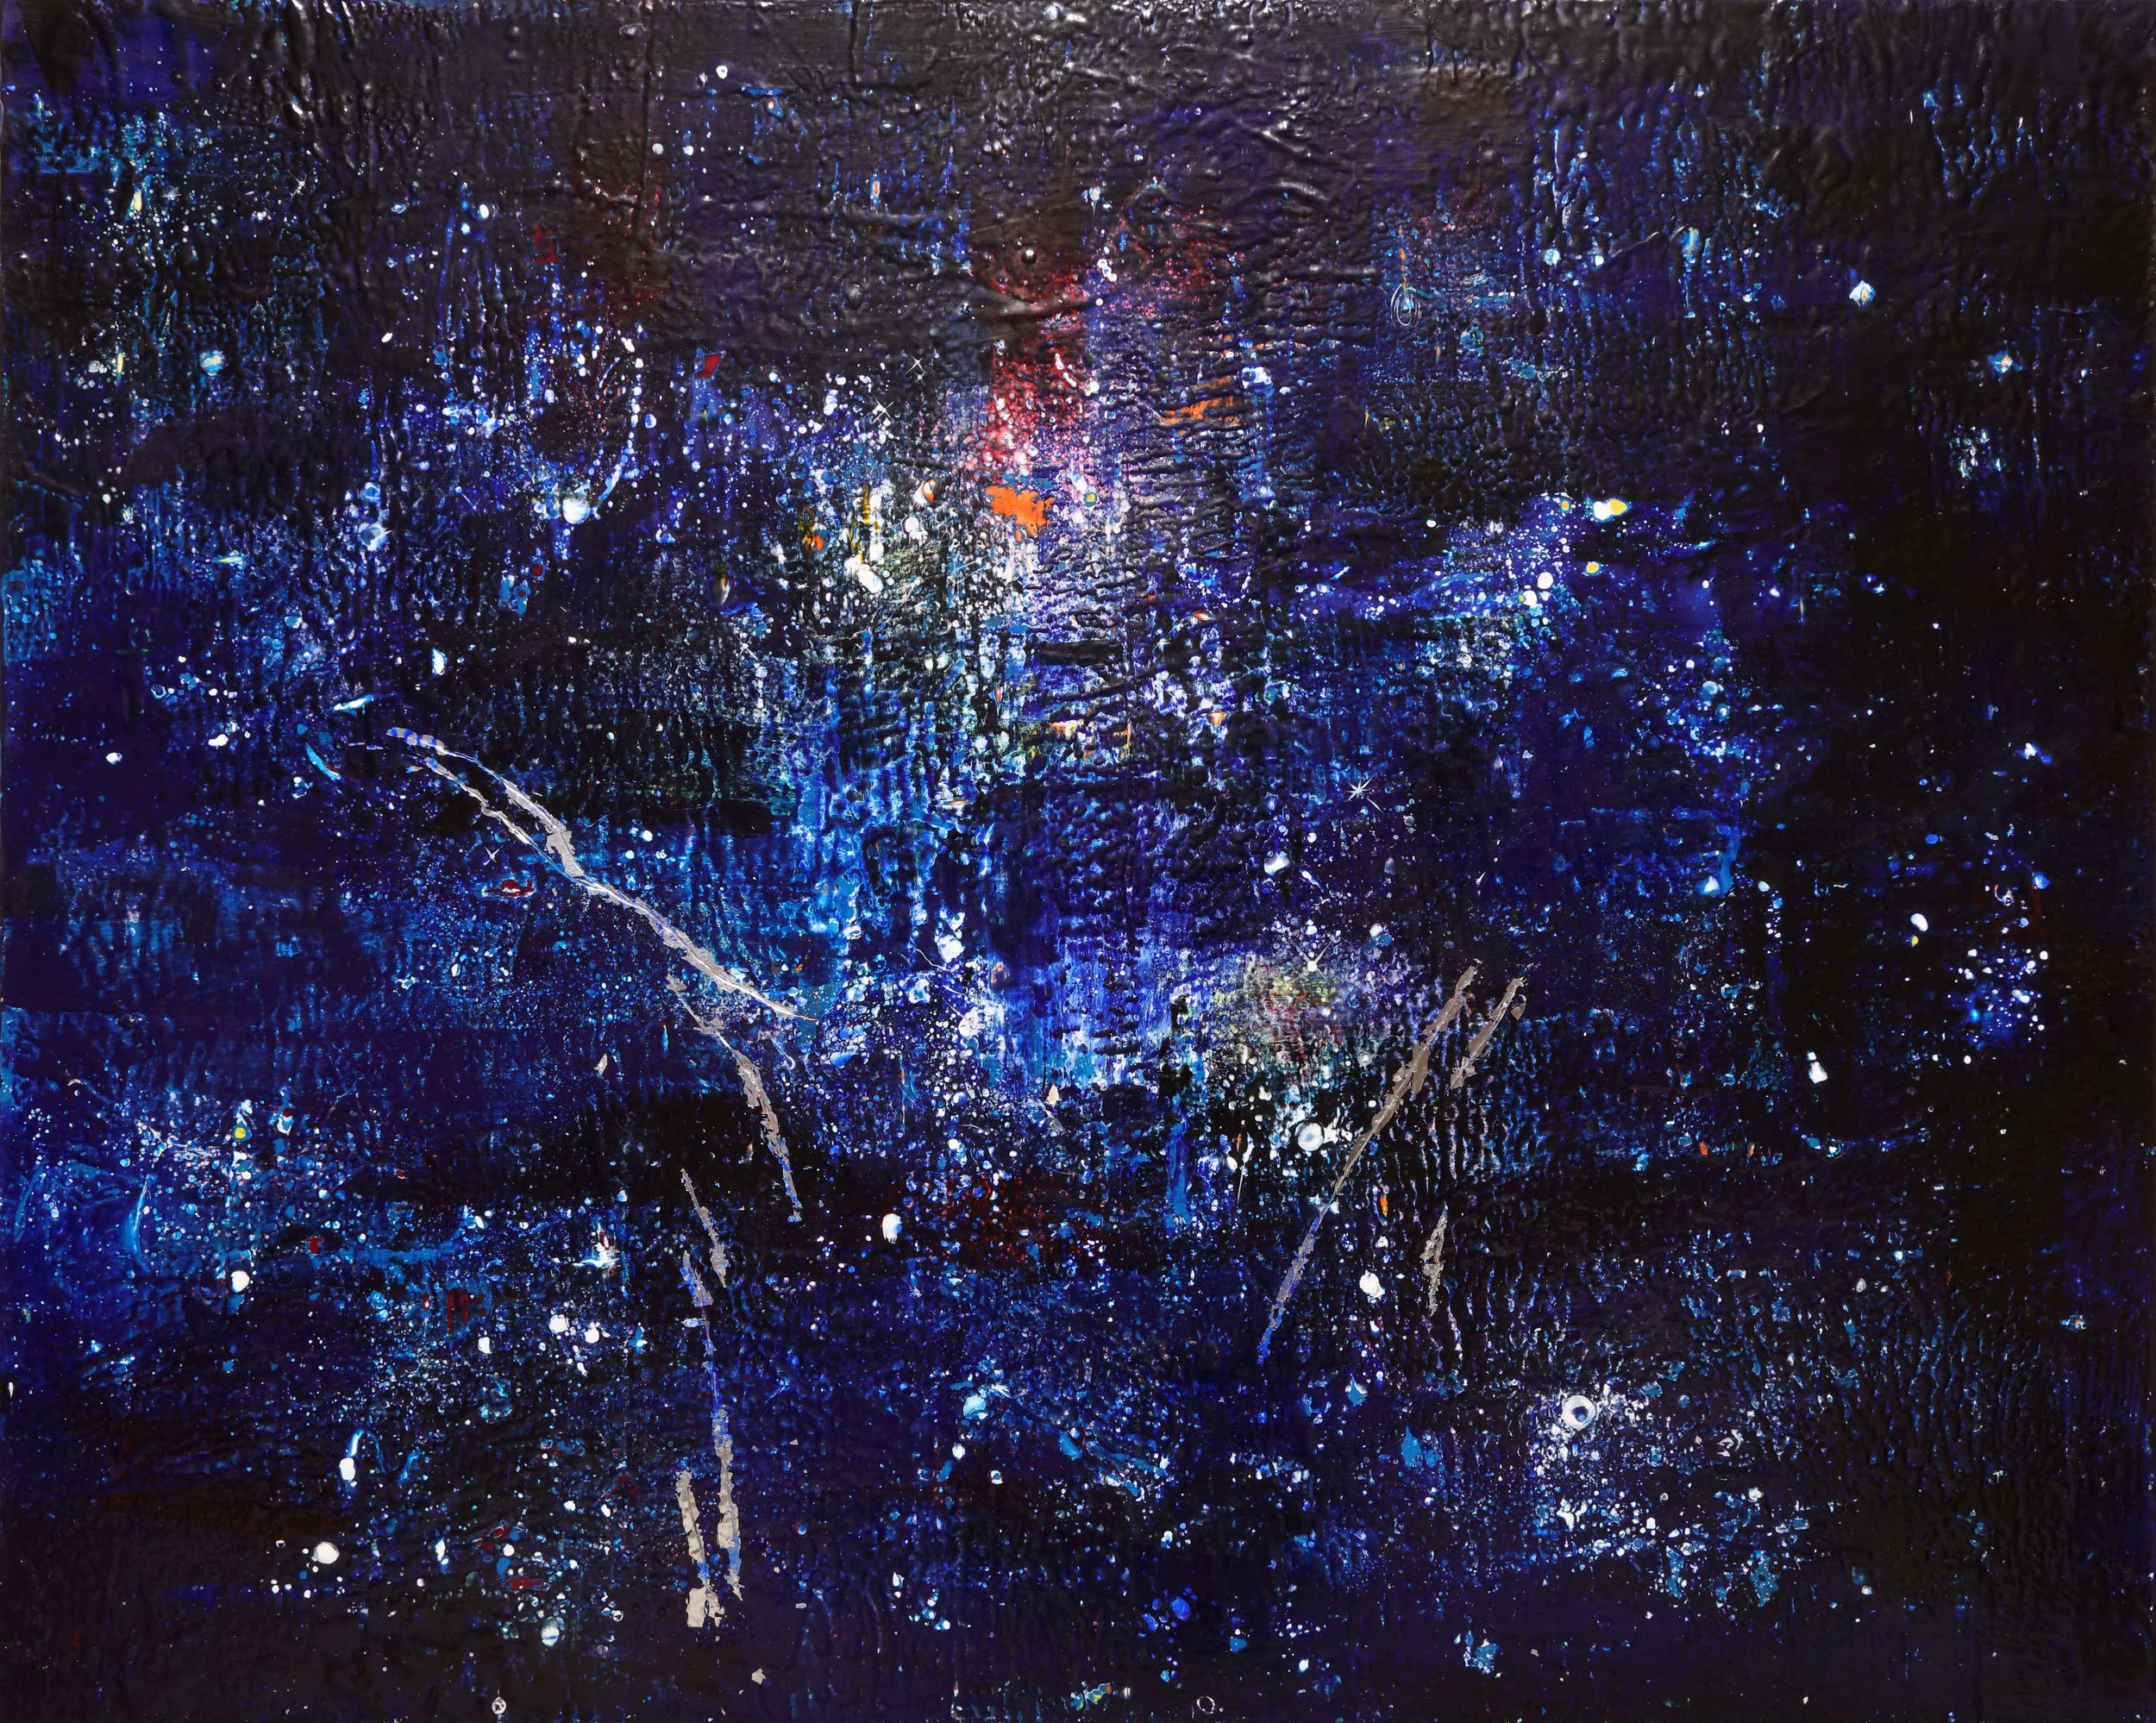    Dark Nebula  , 2018 Encaustic and mixed media on wood panel 48 x 60 x 3 in. 